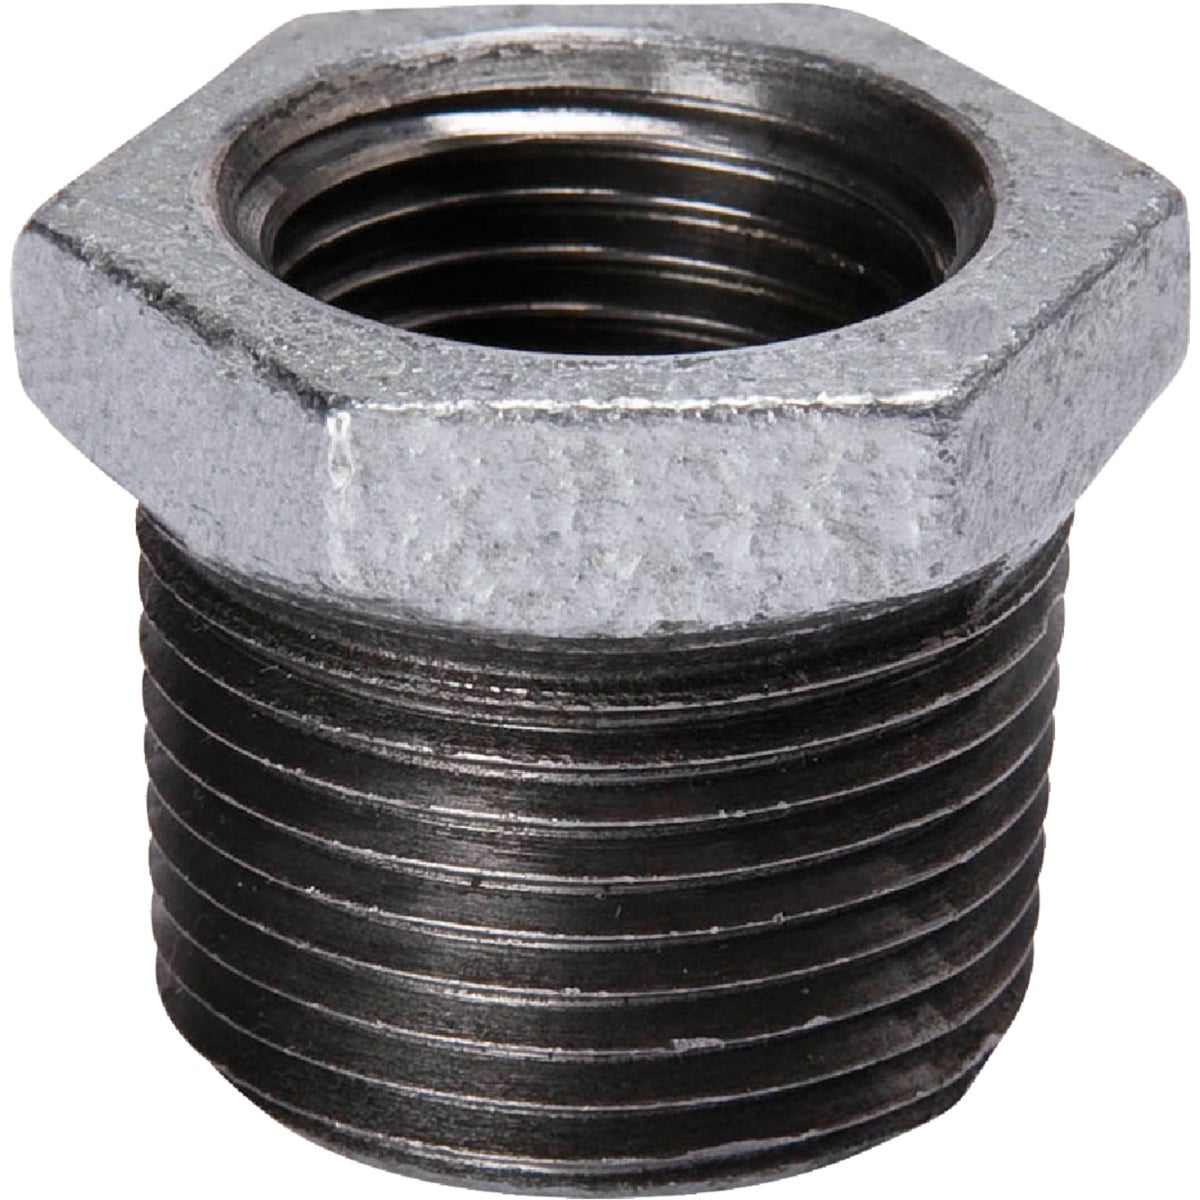 Southland 1/4 In. x 1/8 In. Hex Galvanized Bushing